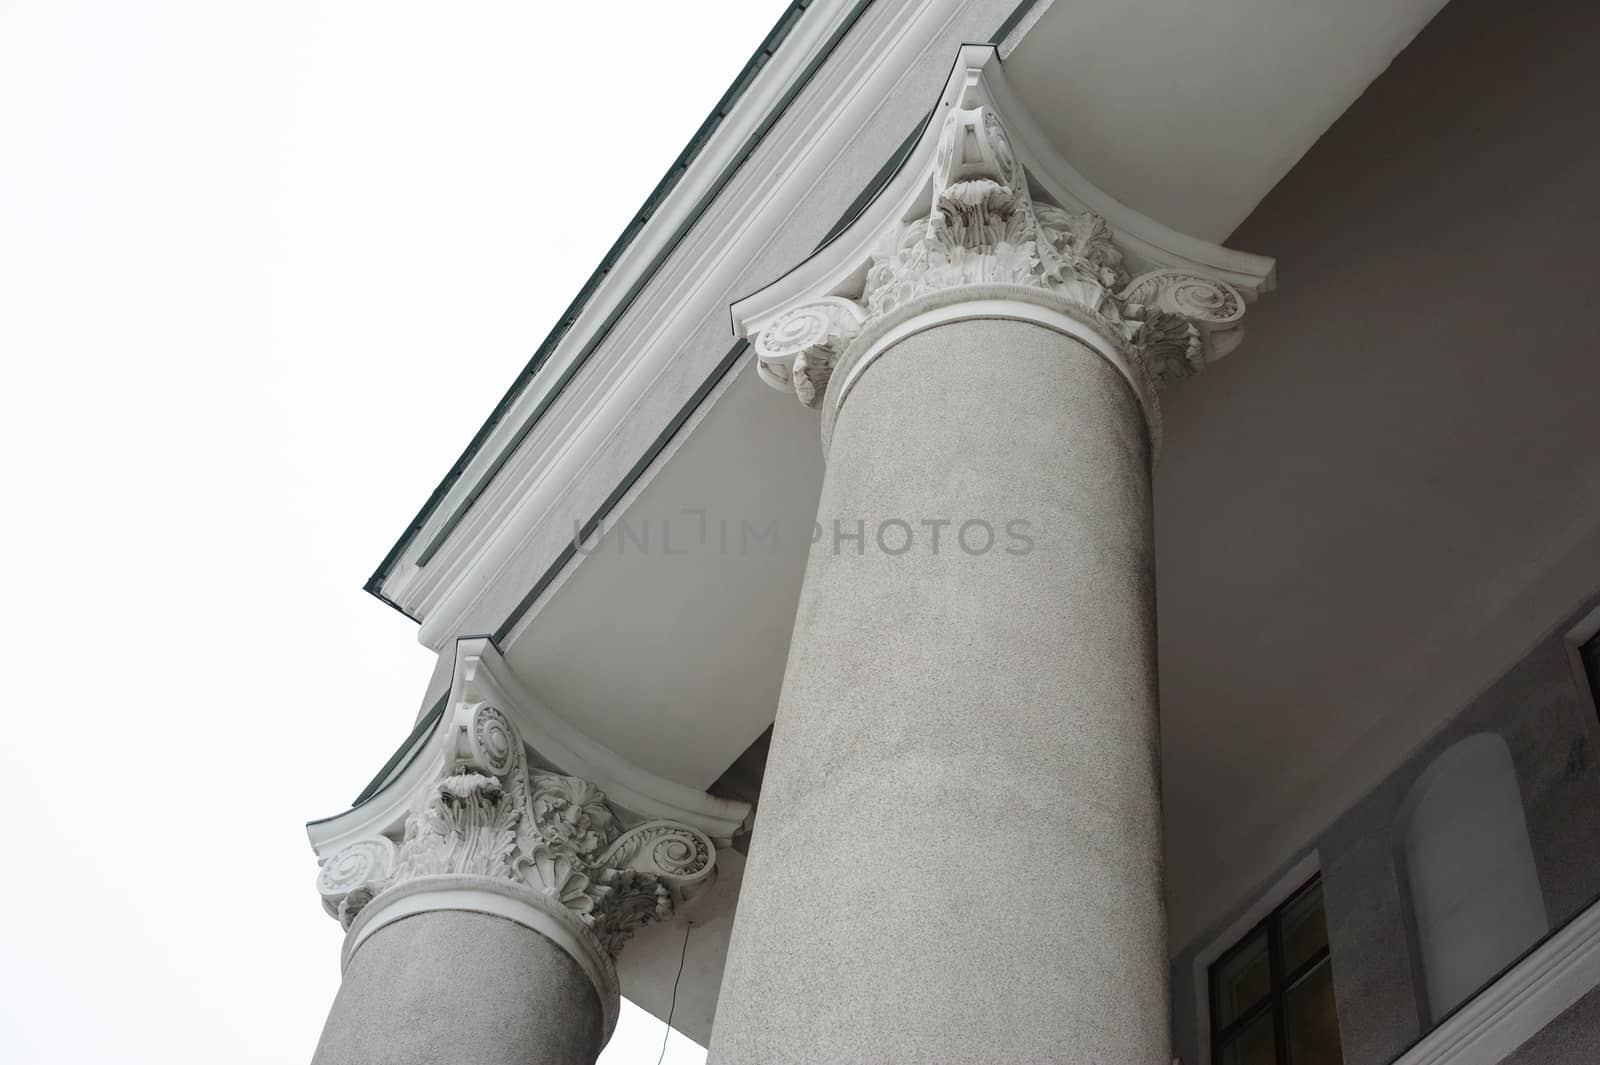 columns on the facade of the building view from the bottom up